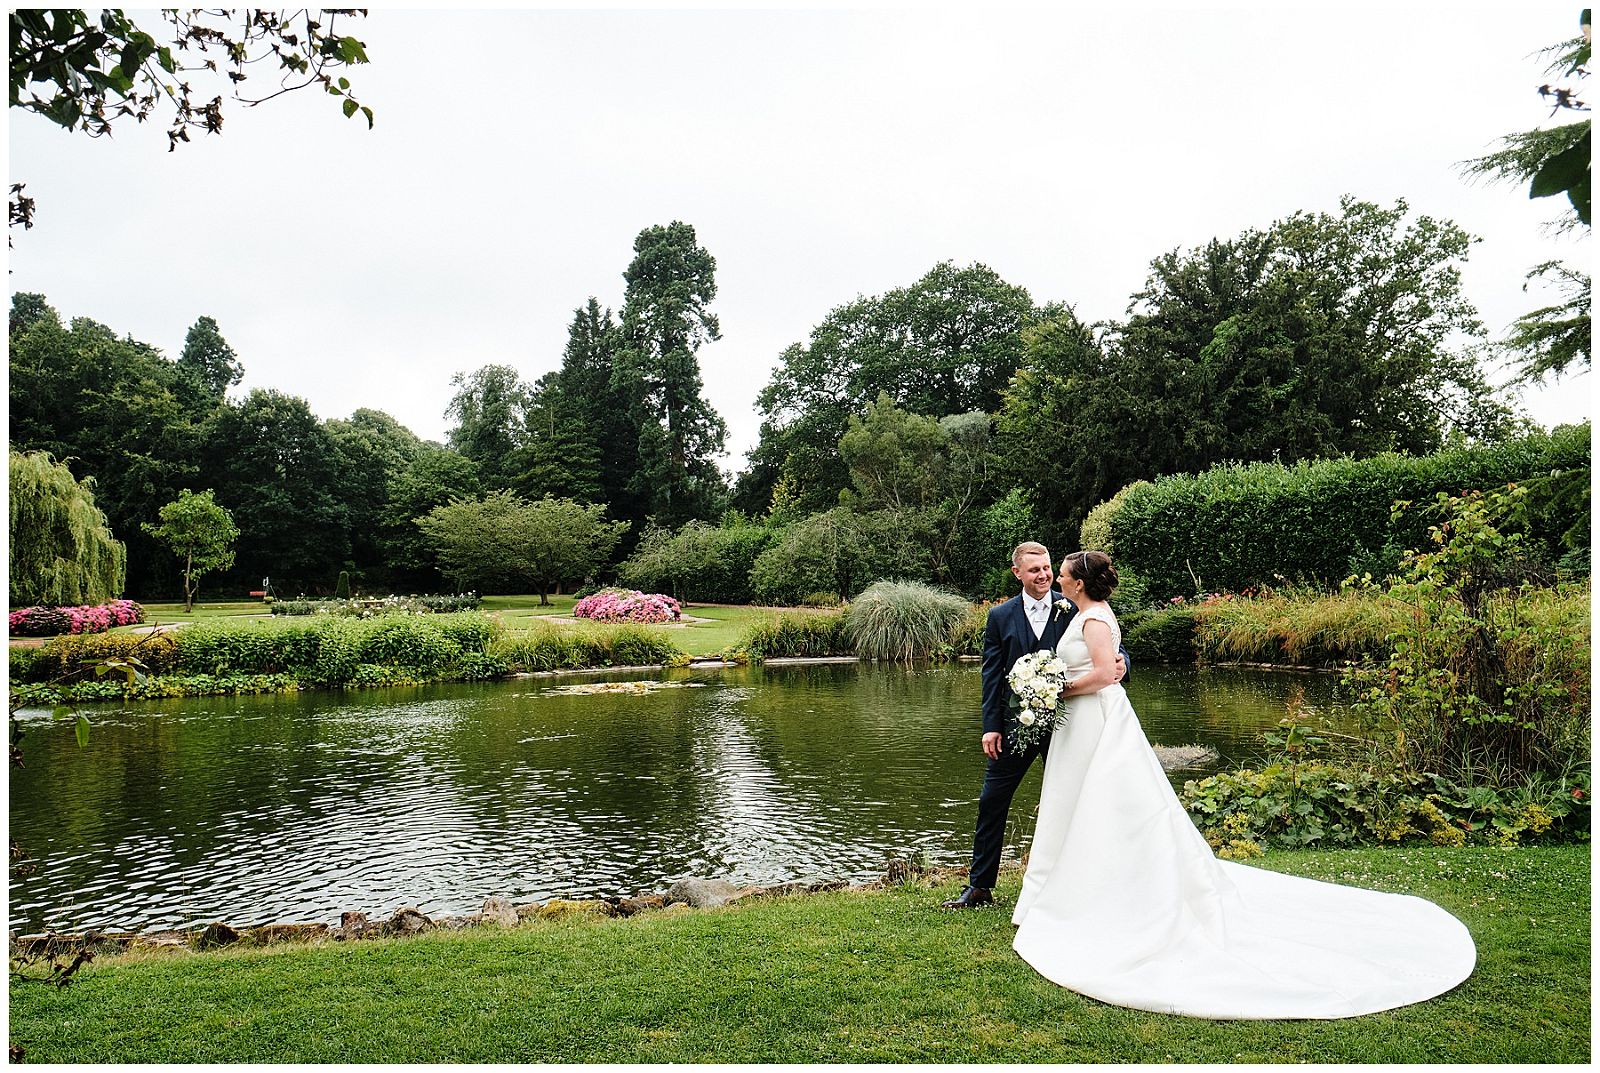 Natural portraits of the bride and groom around the beautiful gardens at Hawkstone Hall in Shrewsbury by Documentary Wedding Photographer Stuart James